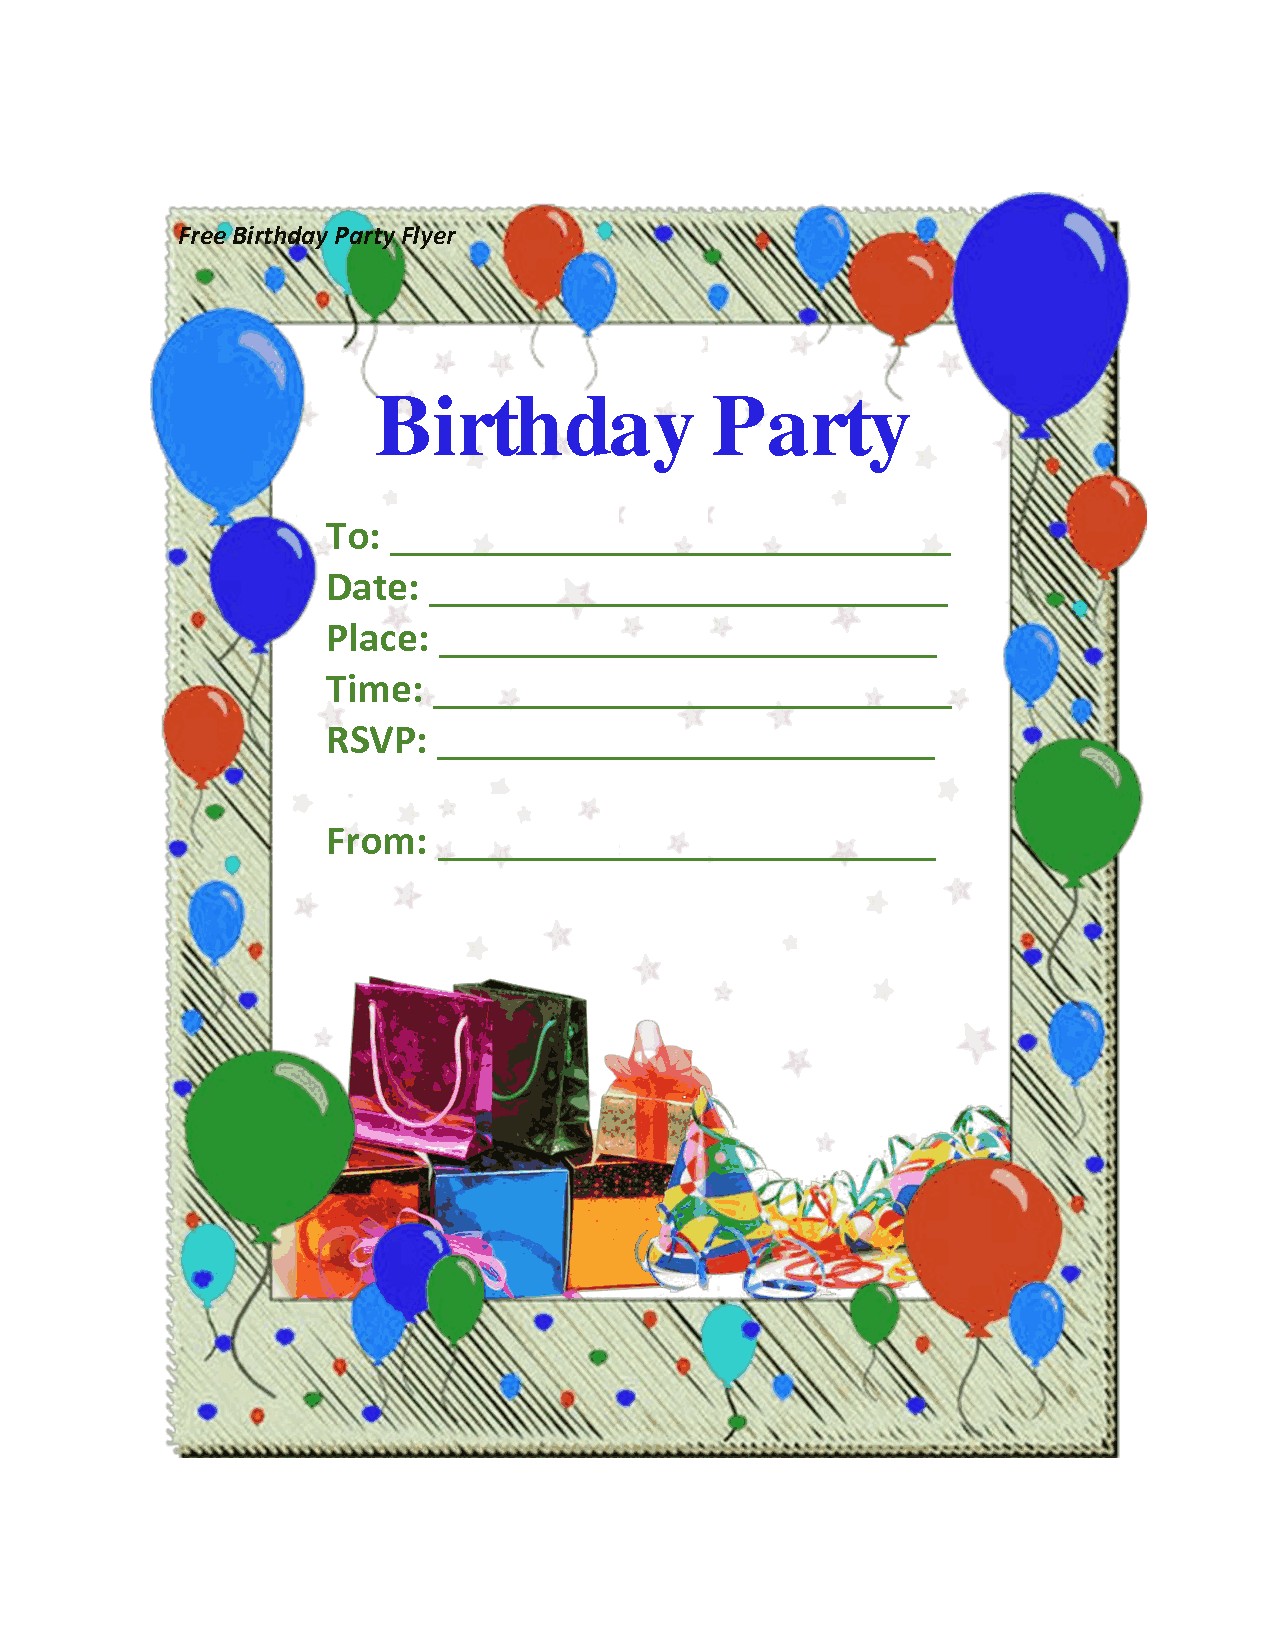 Make An Invitation Card for Your Birthday Party Creatively 10 Stirring Birthday Party Invitations Template